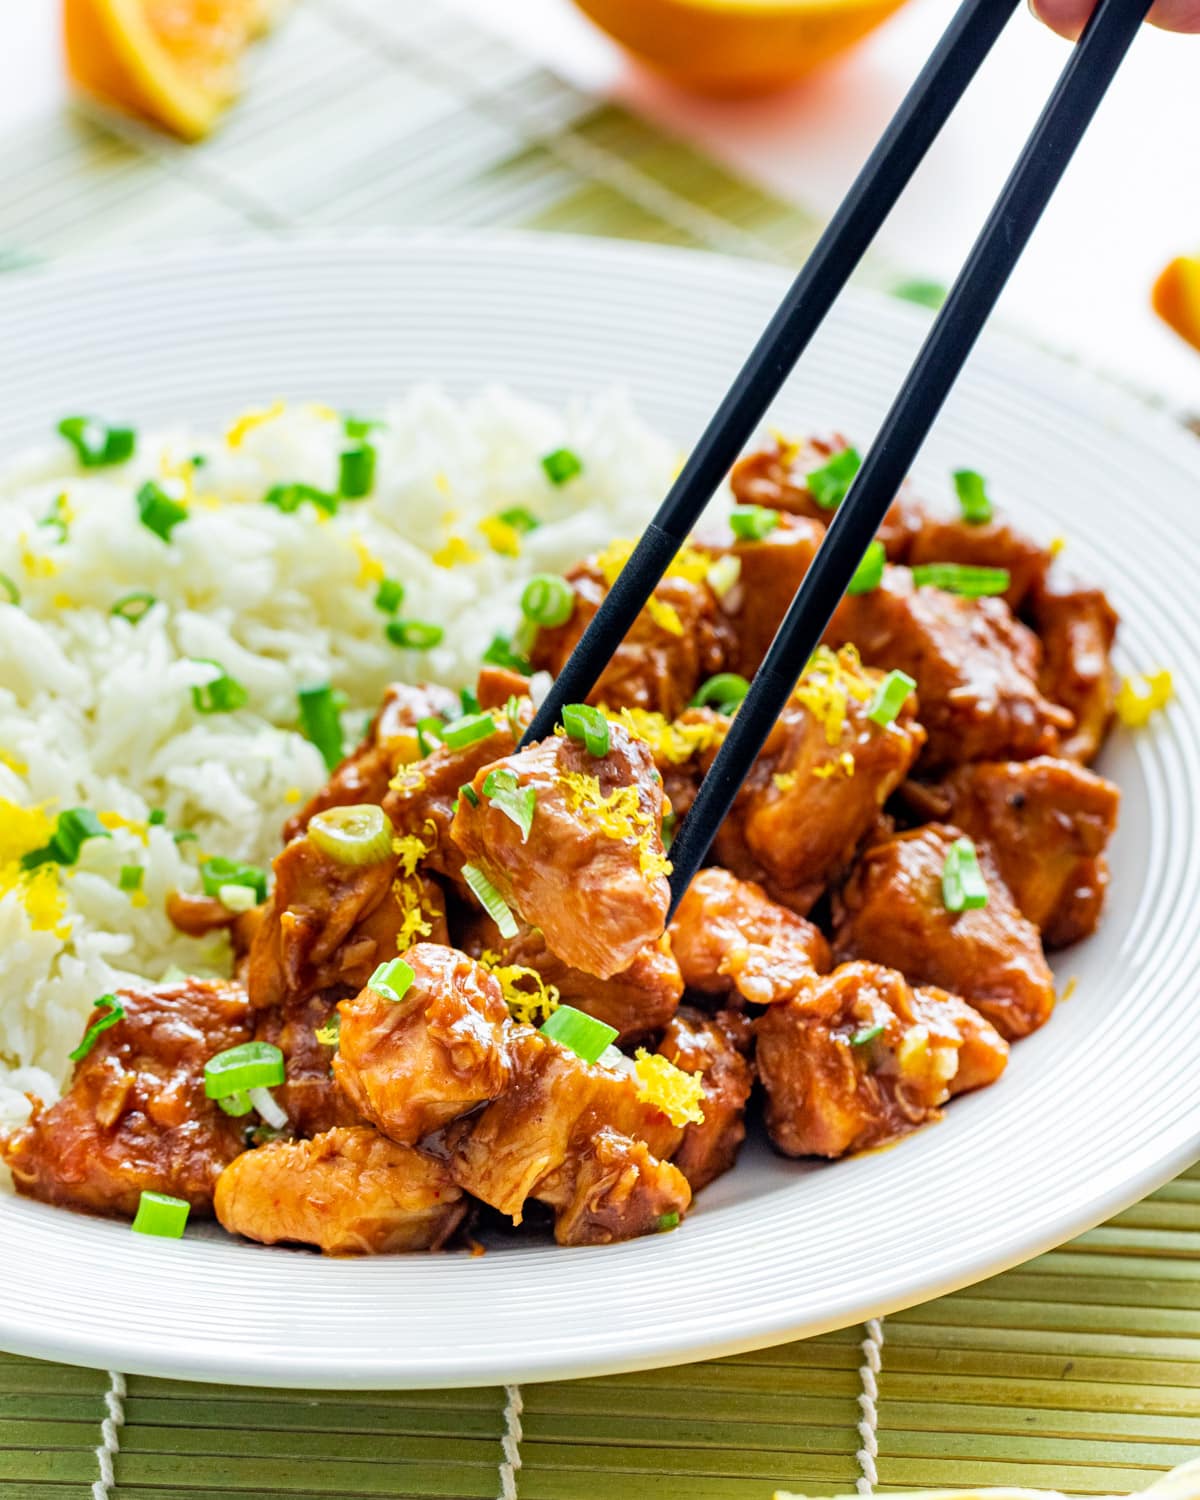 orange chicken on a white plate next to a bed of rice garnished with green onions and lemon zest